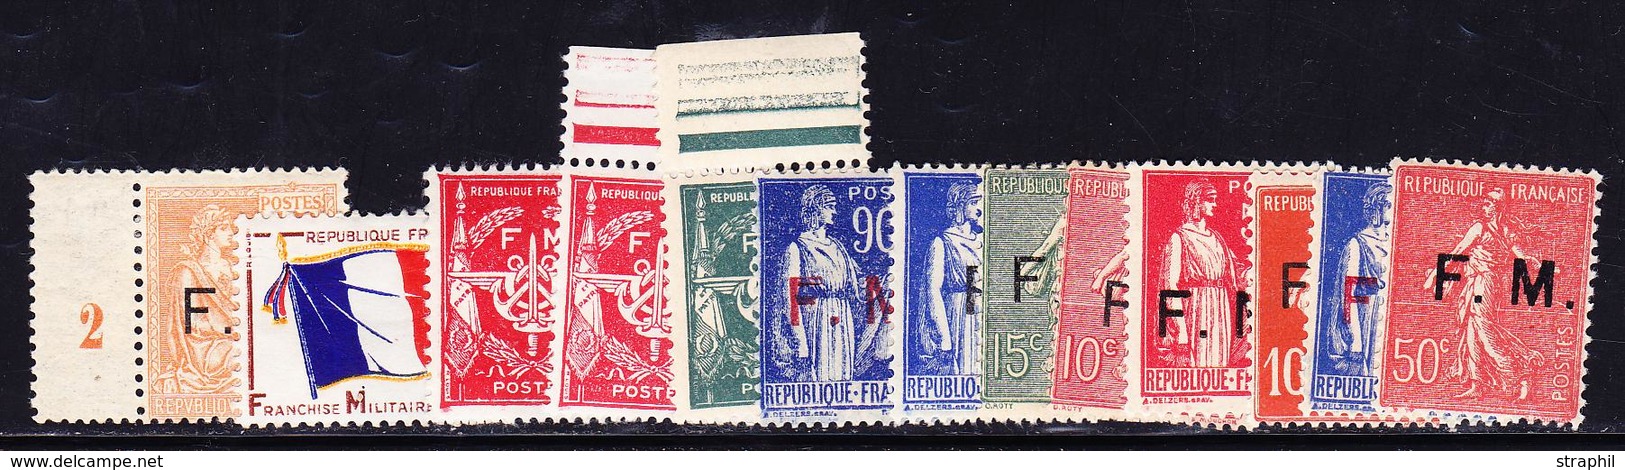 * FRANCHISE MILITAIRE - * - N°1, 3/13, 7a - Qques ** - TB - Military Postage Stamps